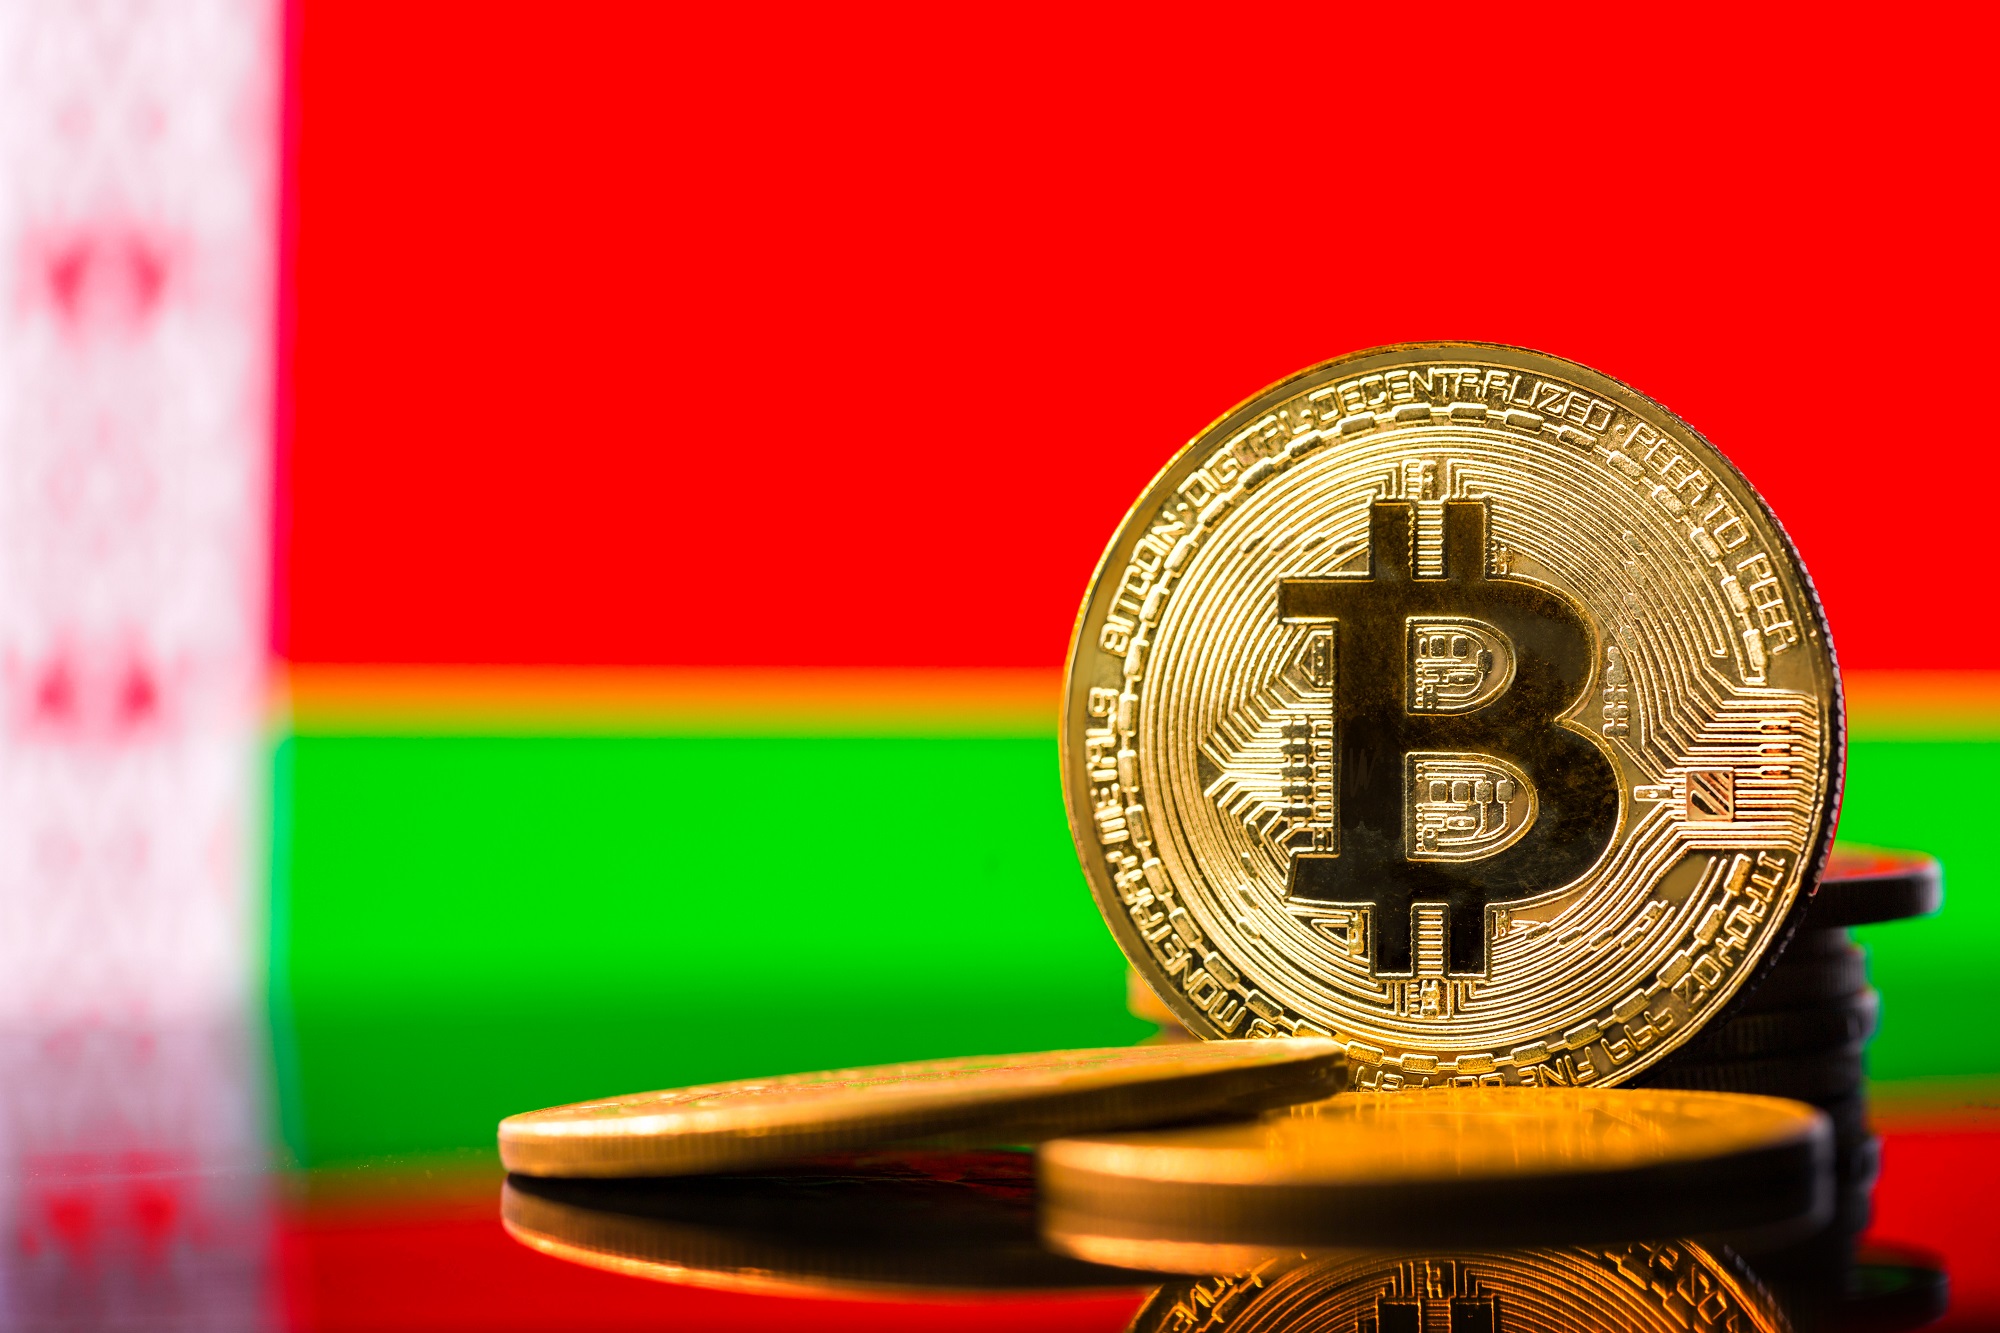 A token representing Bitcoin against the background of the flag of Belarus.